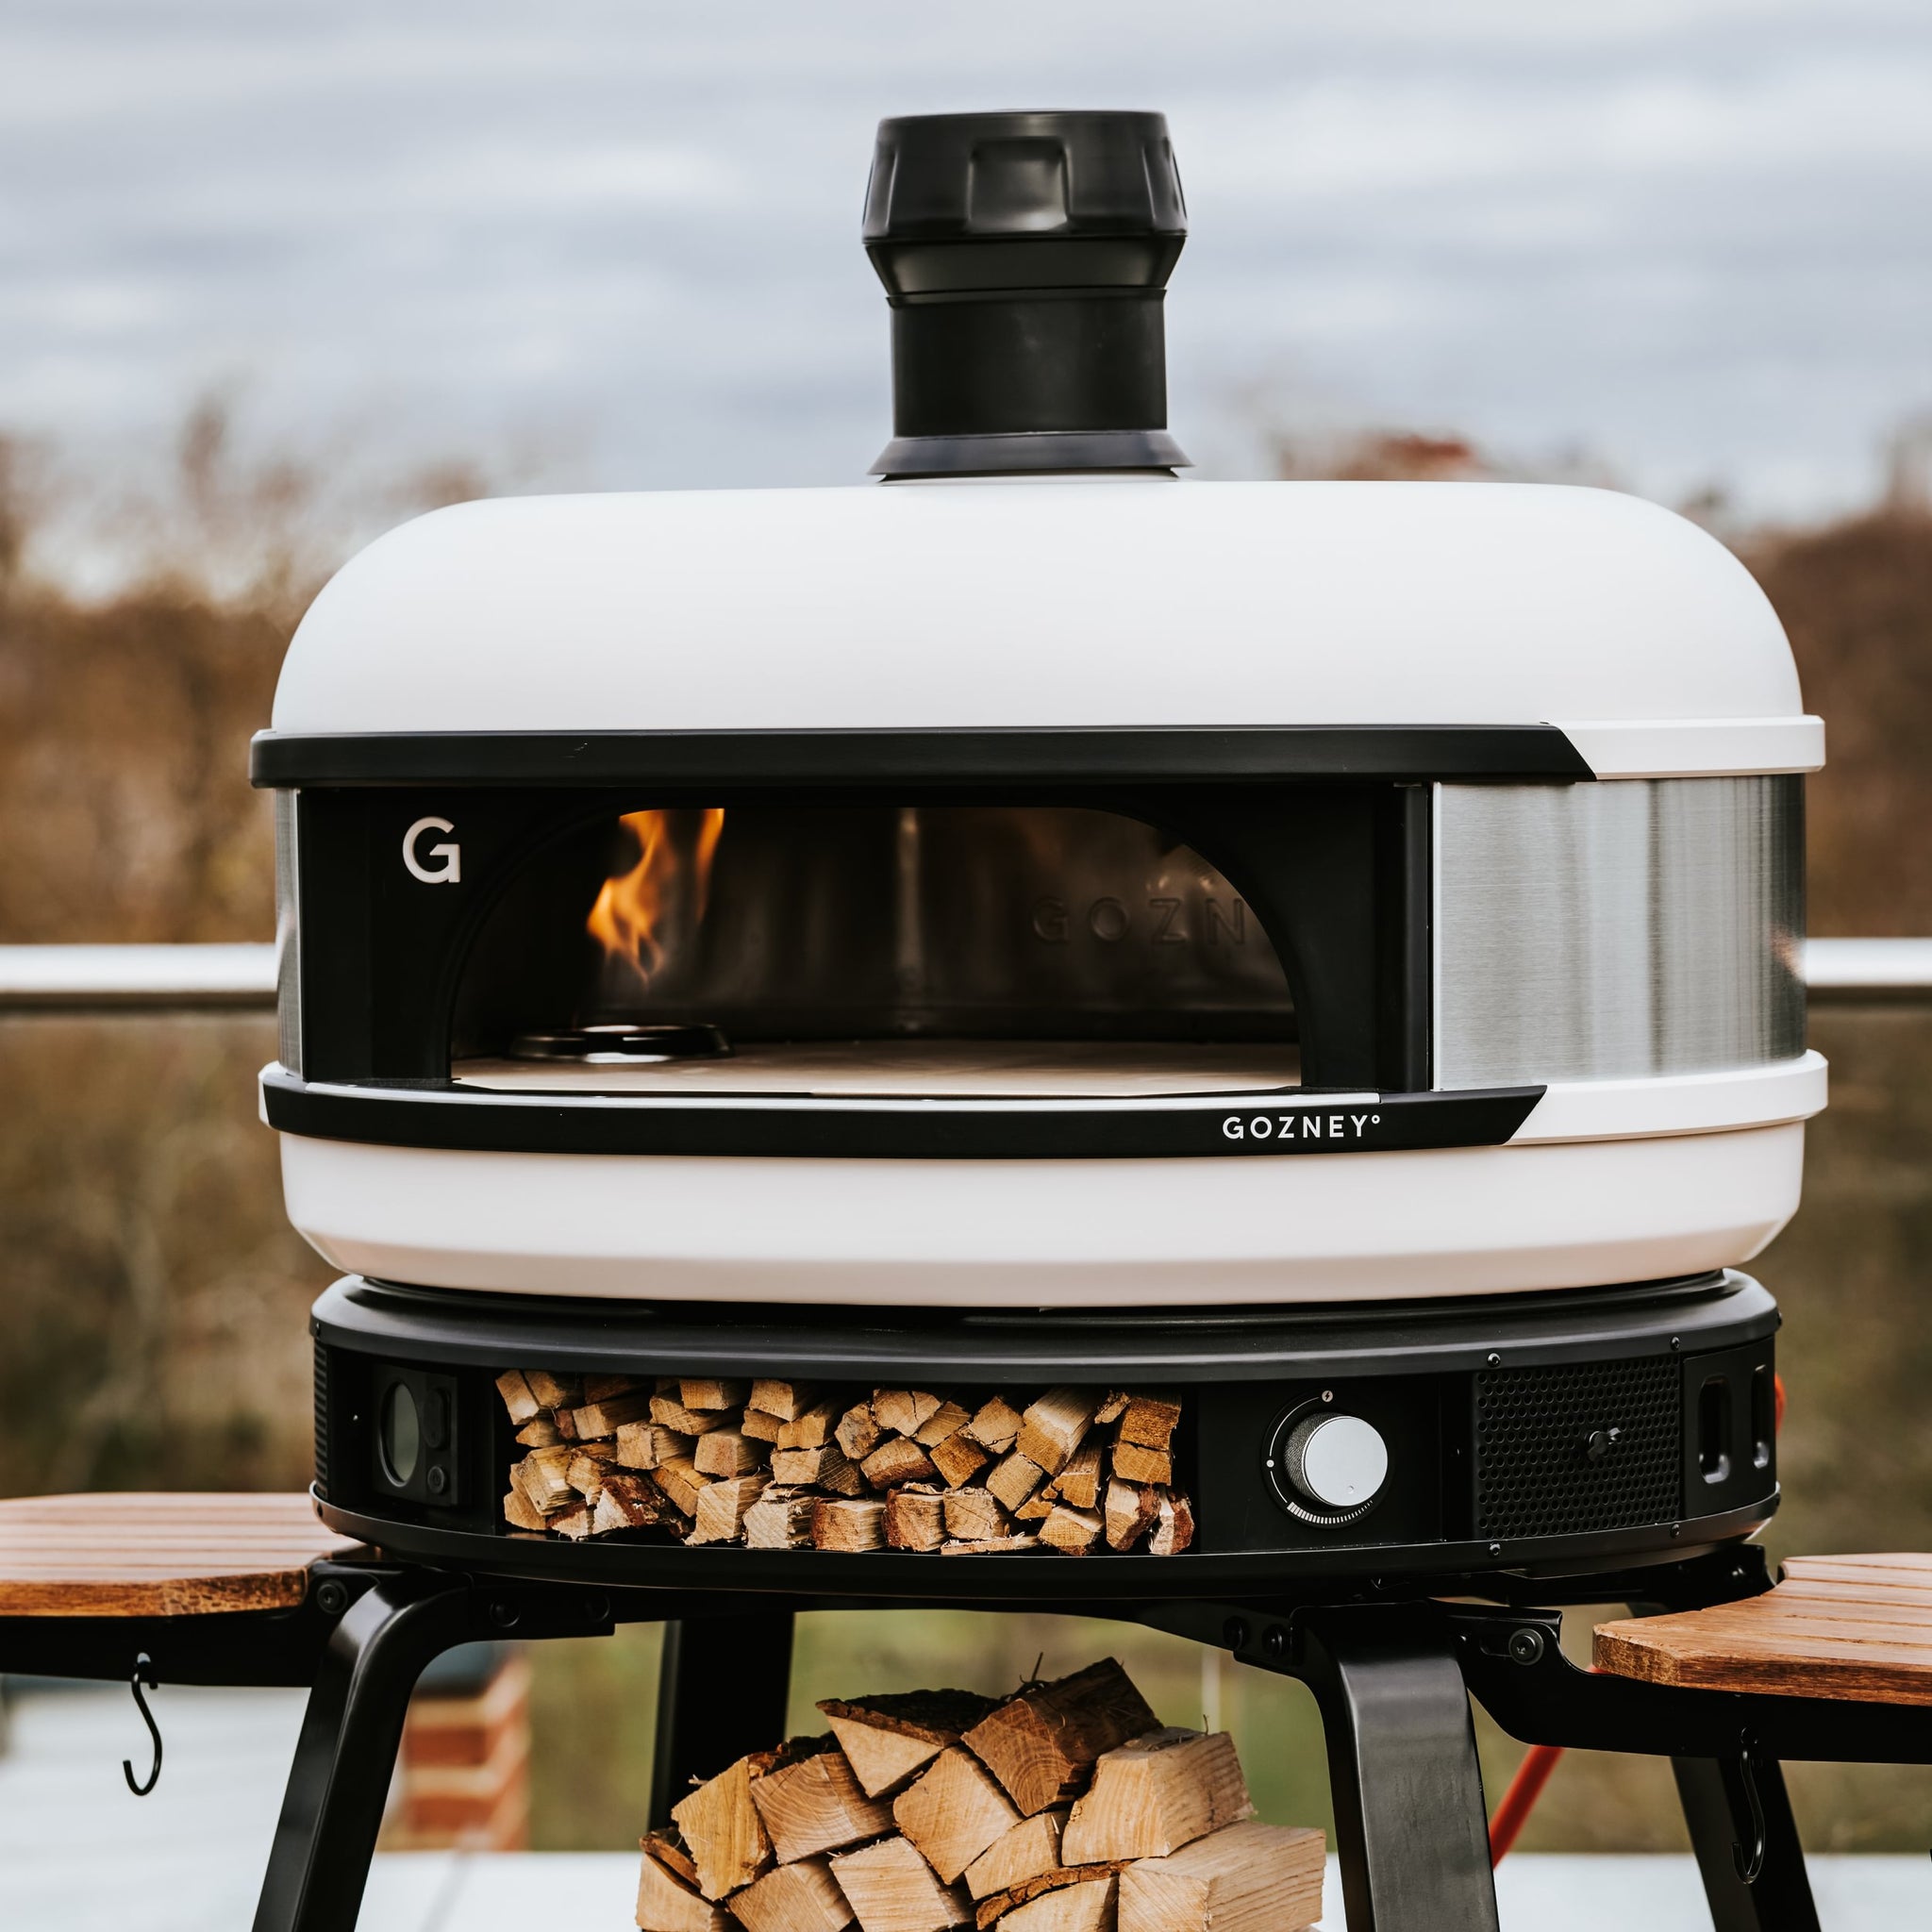 Outdoor pizza oven | Pizza oven